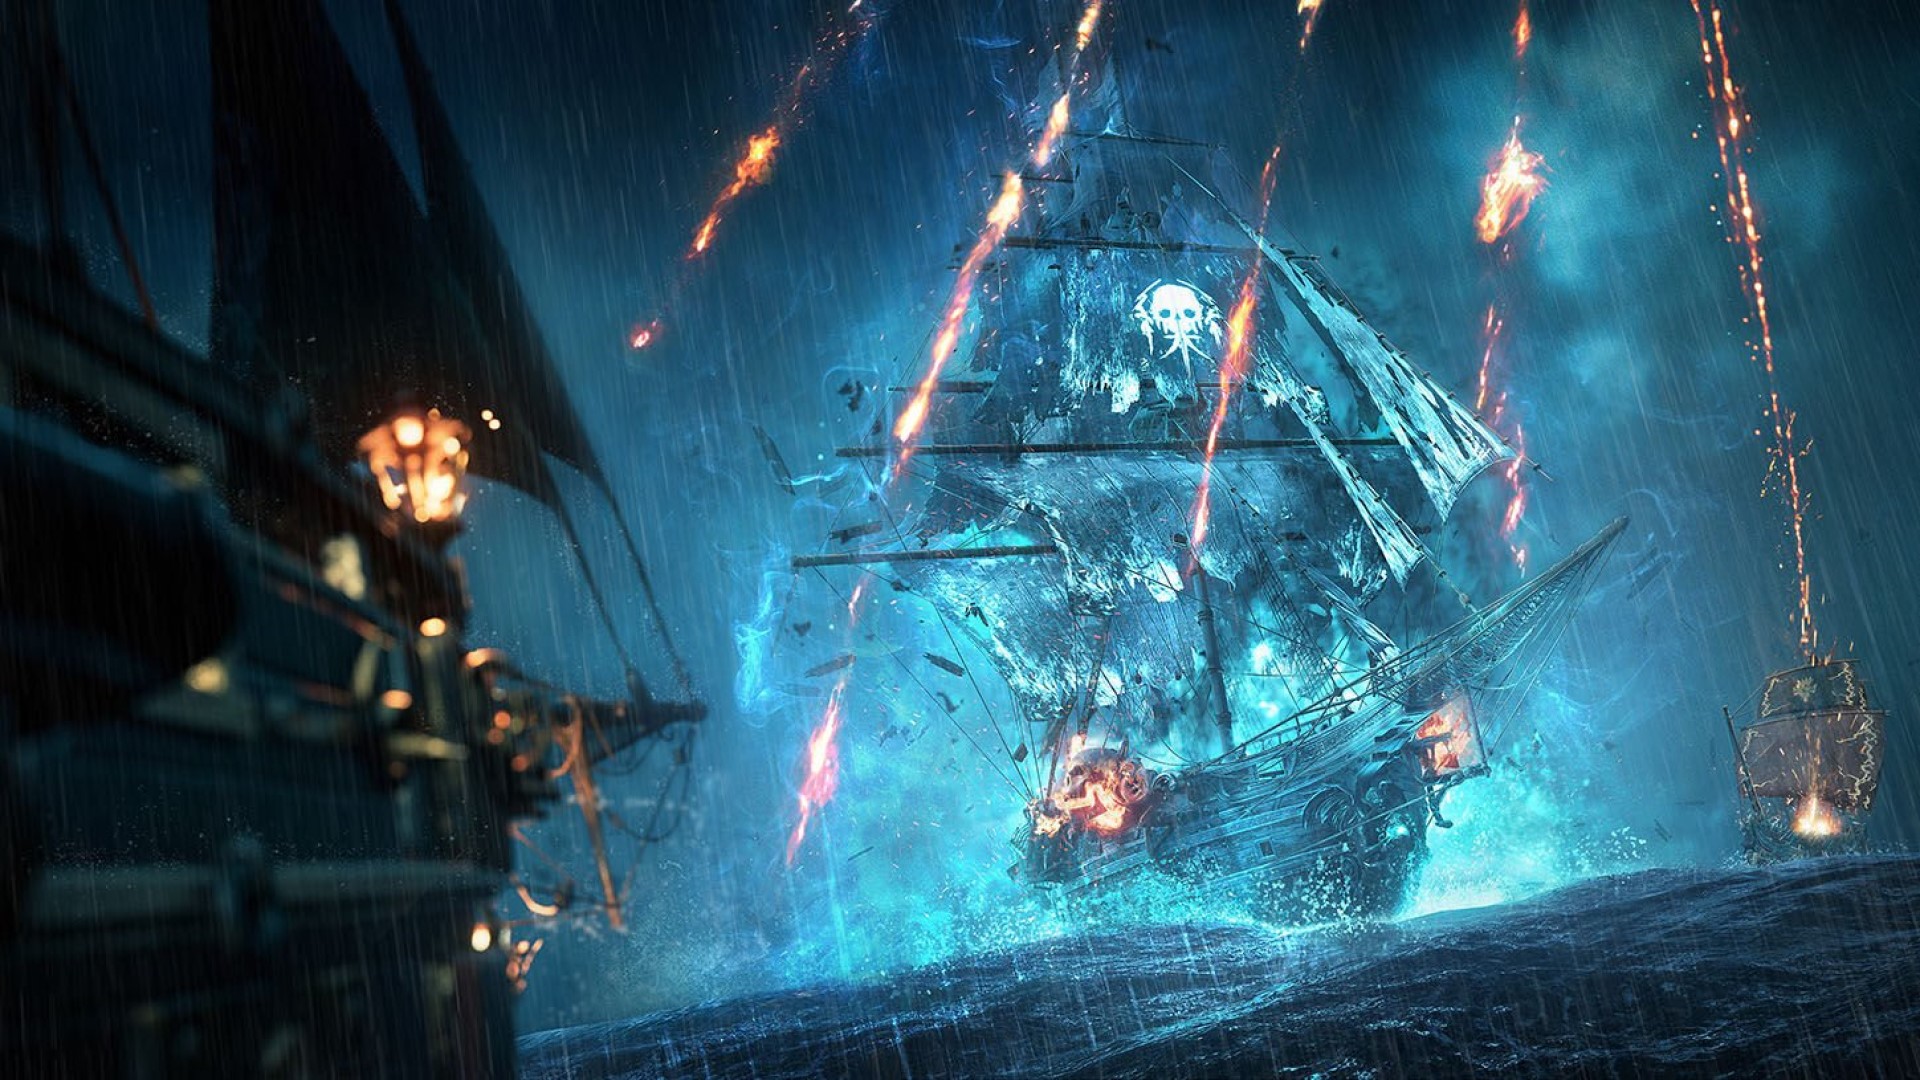 Skull and Bones Dev Diary Outlines Setting and Real-World Influences